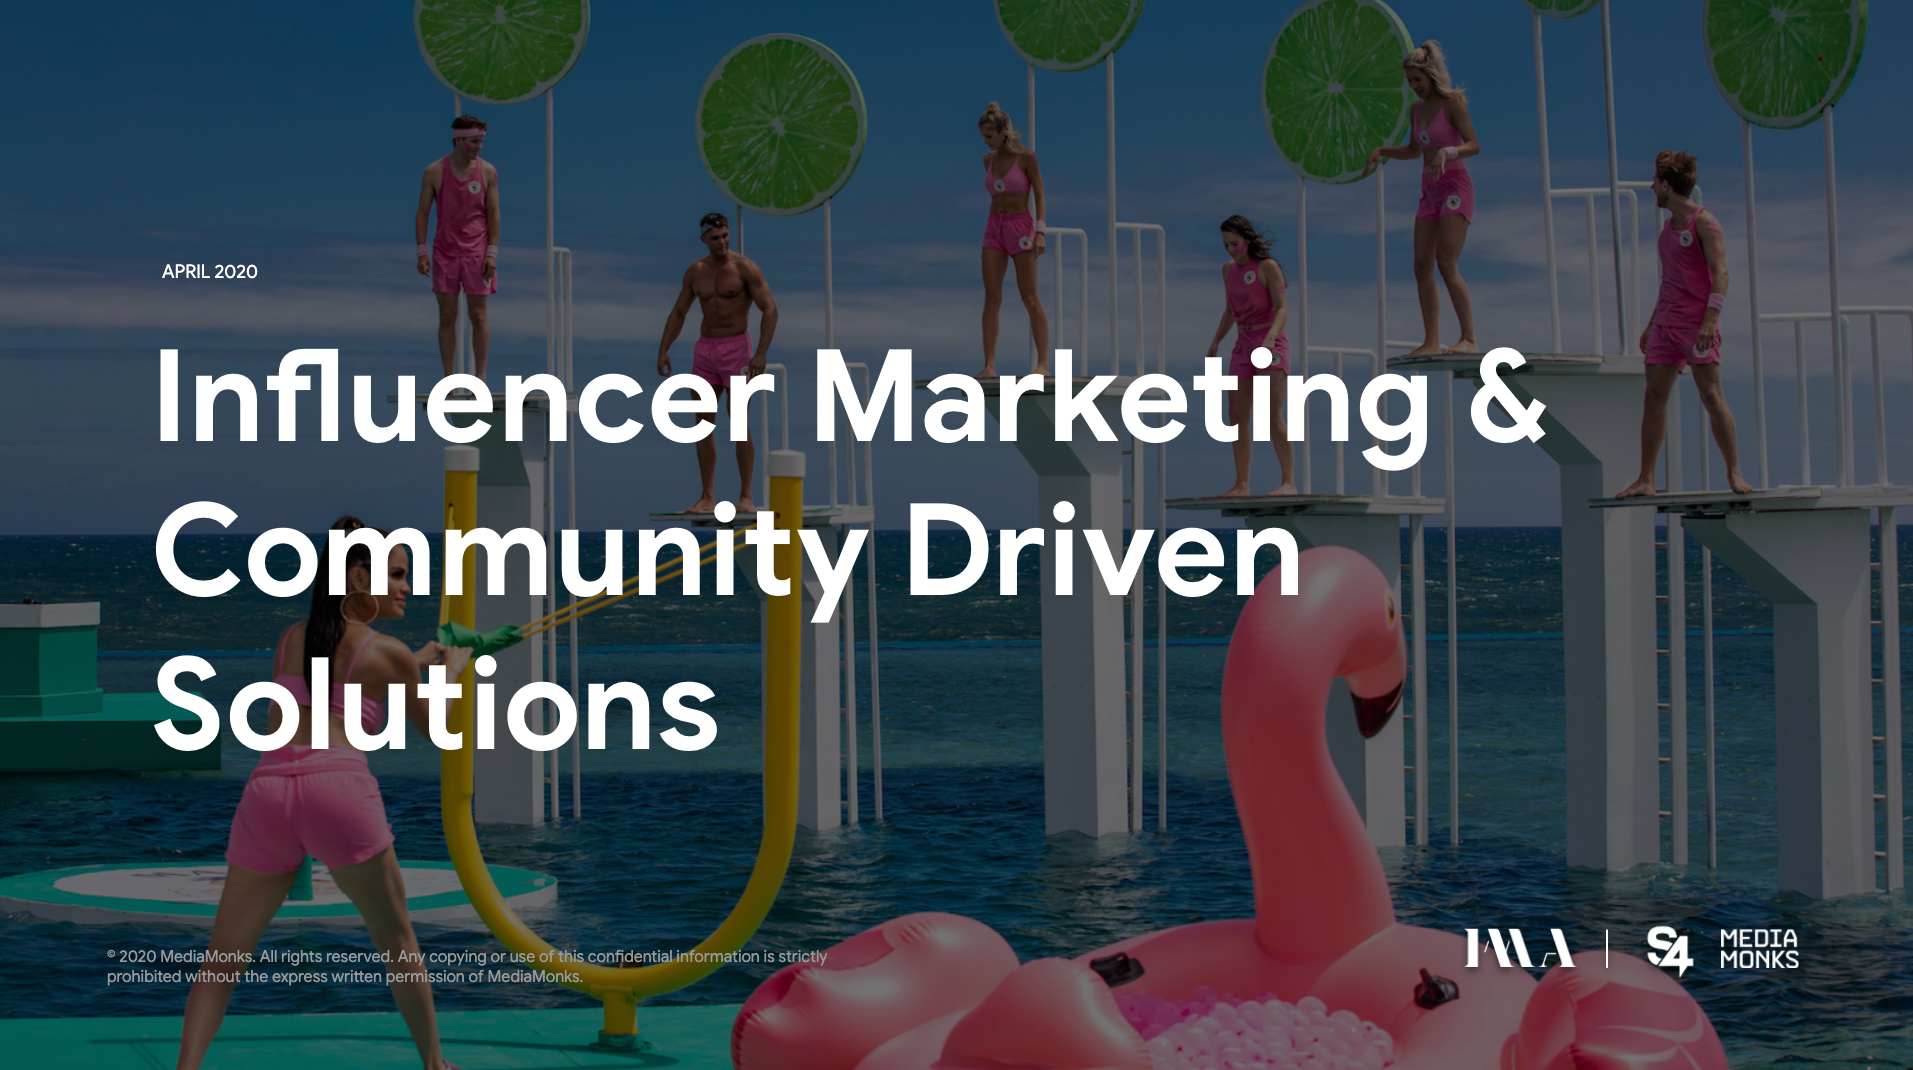 How brands can leverage influencer marketing during COVID-19